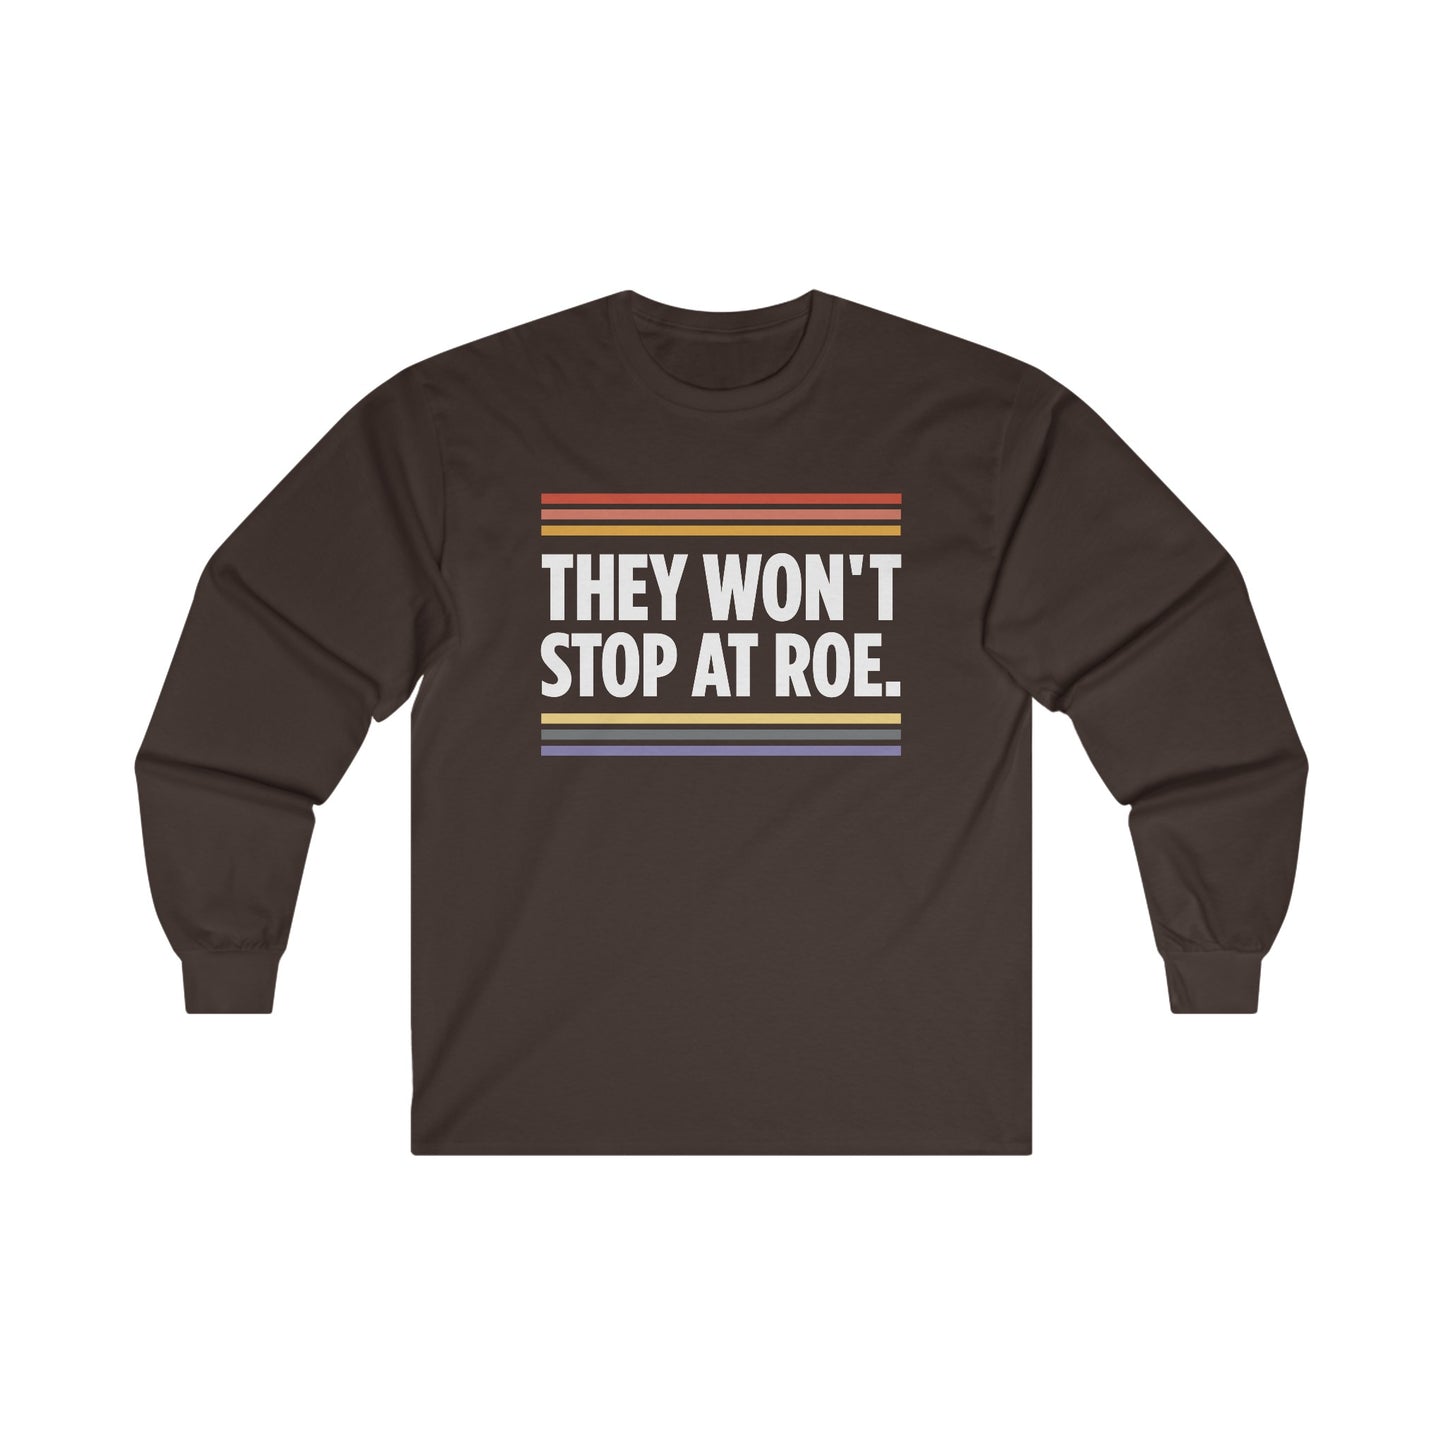 “They Won't Stop at Roe” Unisex Long Sleeve T-Shirt